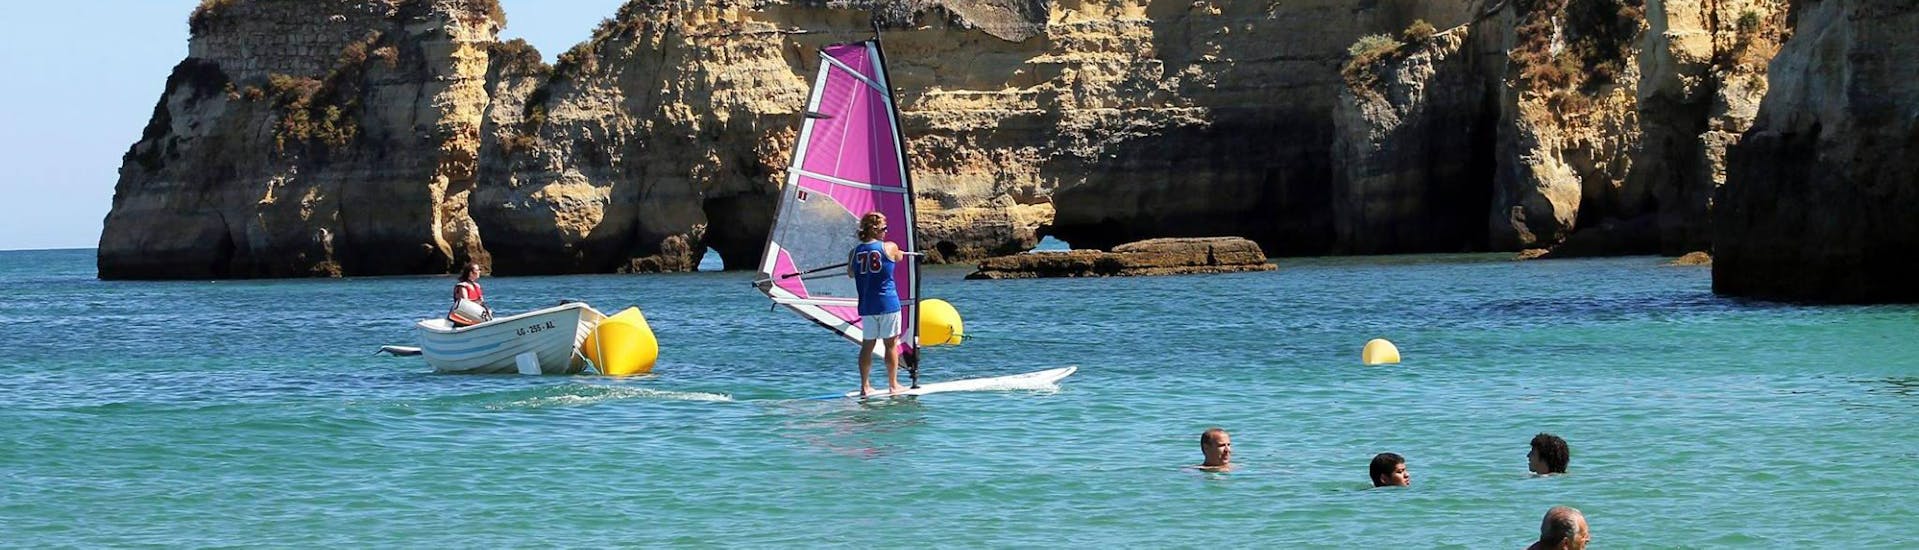 Windsurfing Lessons for Kids & Adults - Advanced.